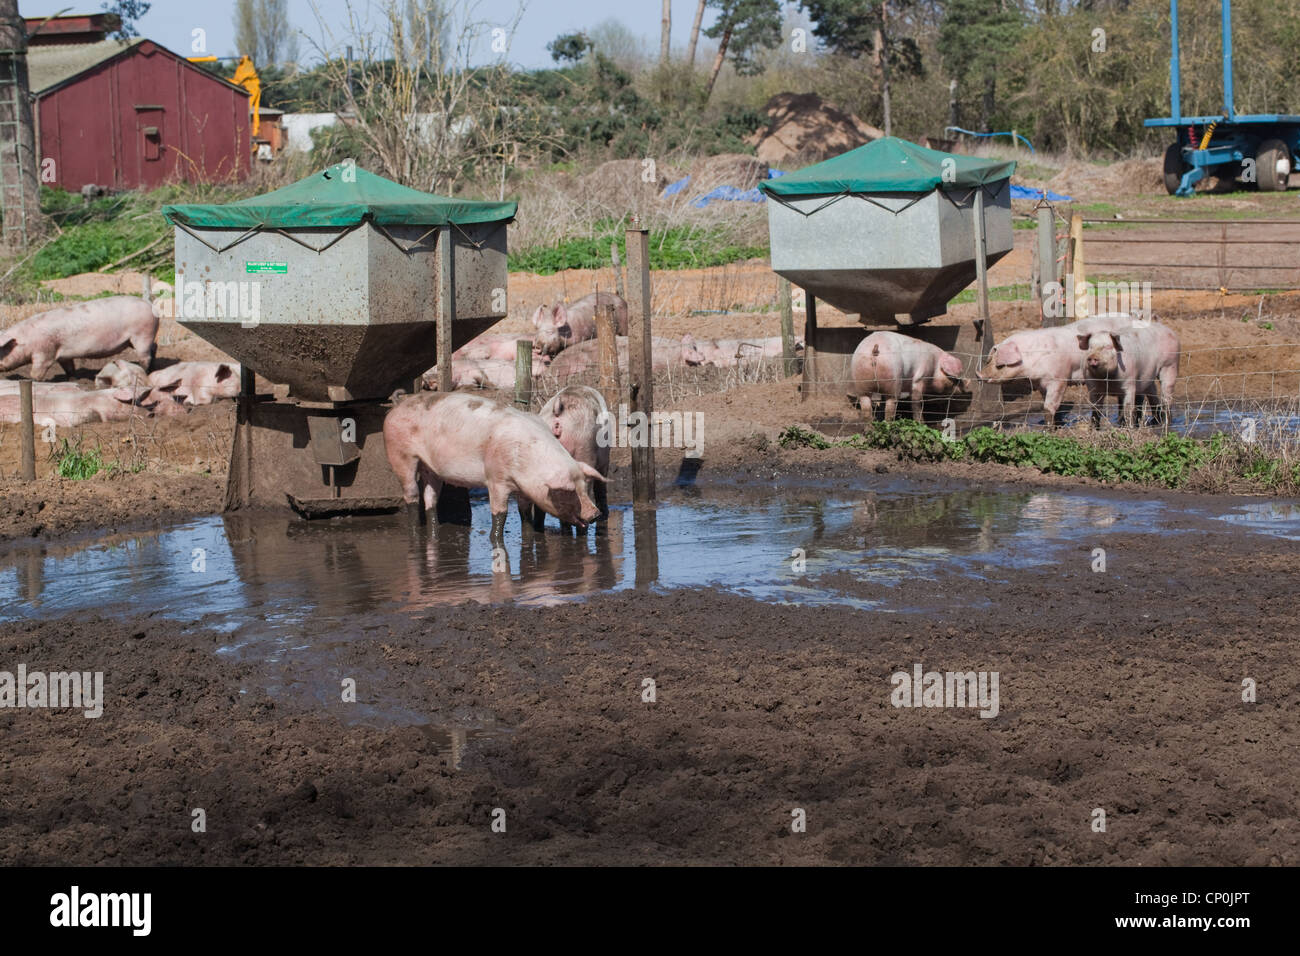 Domestic Pigs (Sus scrofa). Pig Farm. Free ranging with gravity fed feeders in an open air, outdoor enclosure. Stock Photo